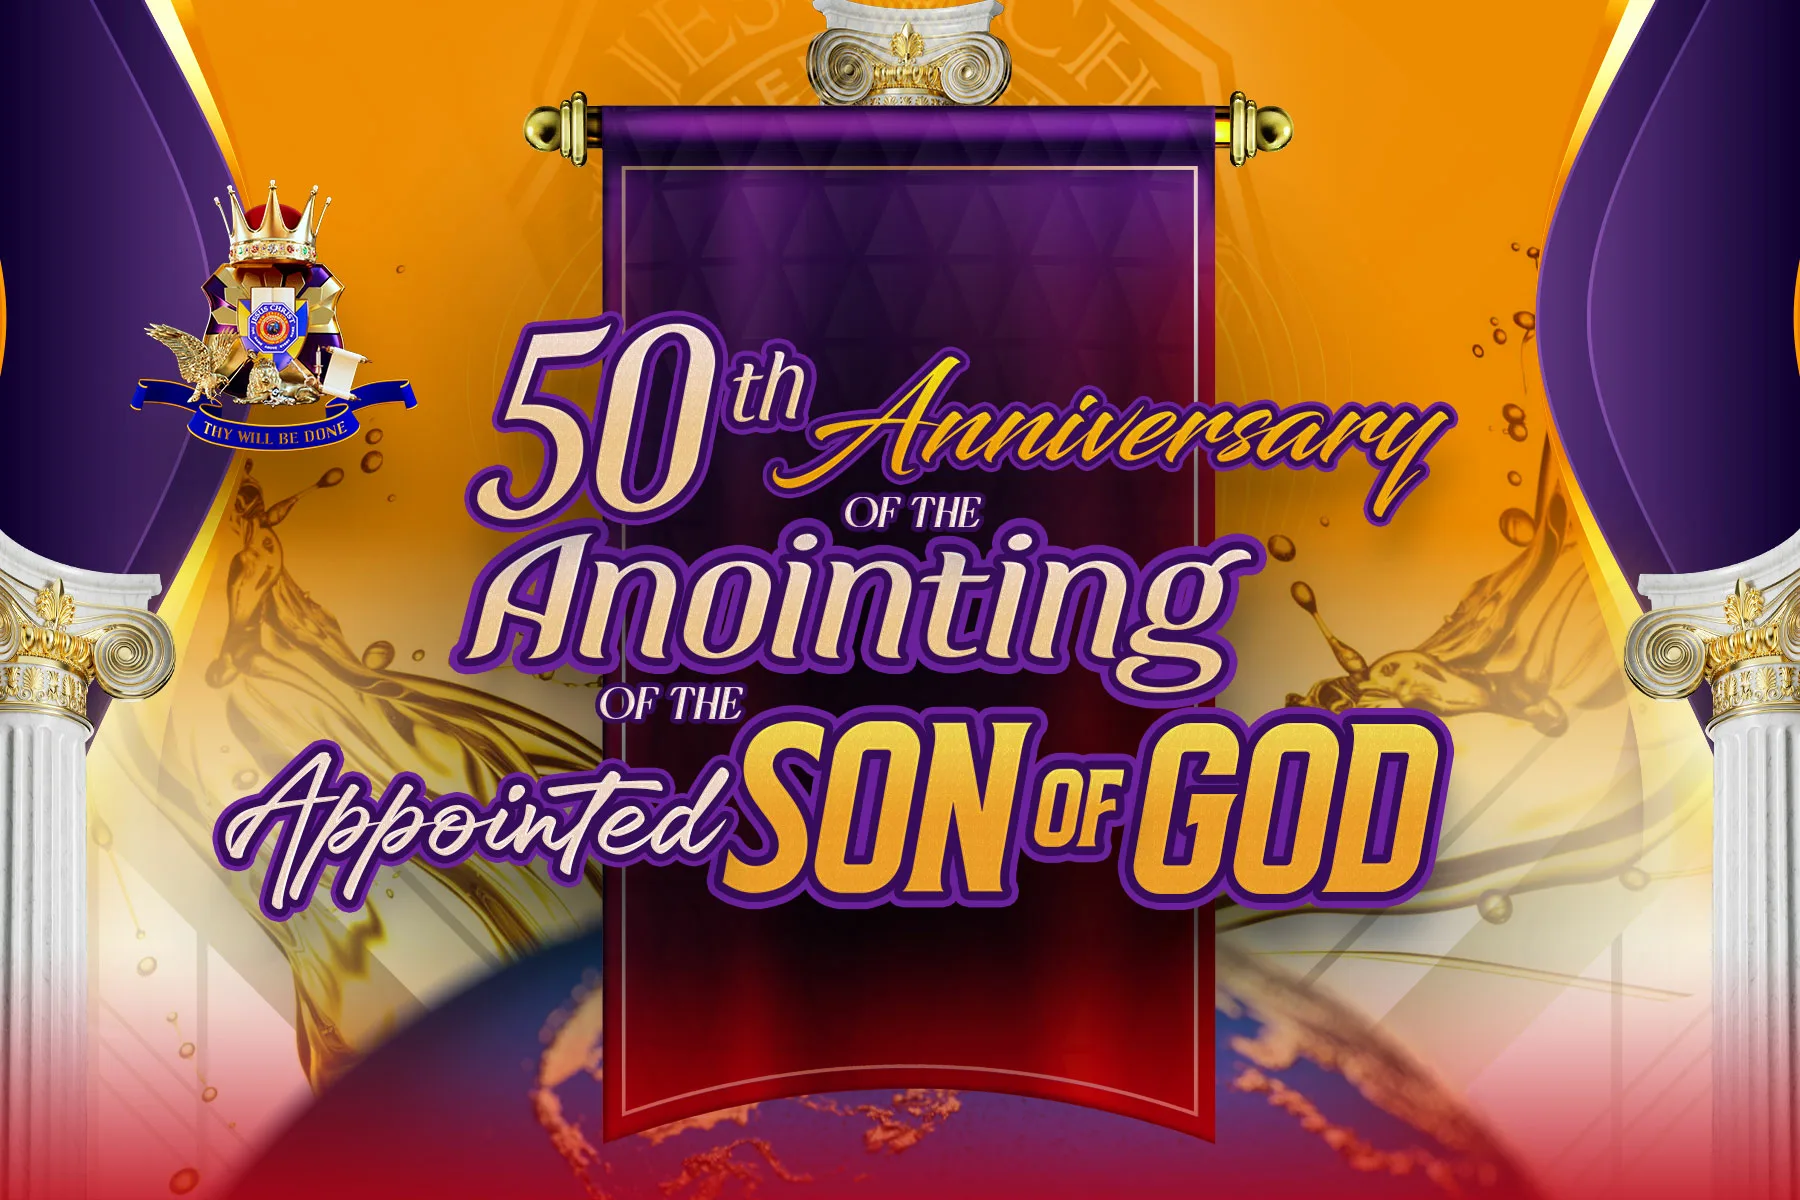 HAPPY 50TH ANNIVERSARY OF THE ANOINTING OF THE APPOINTED SON OF GOD.